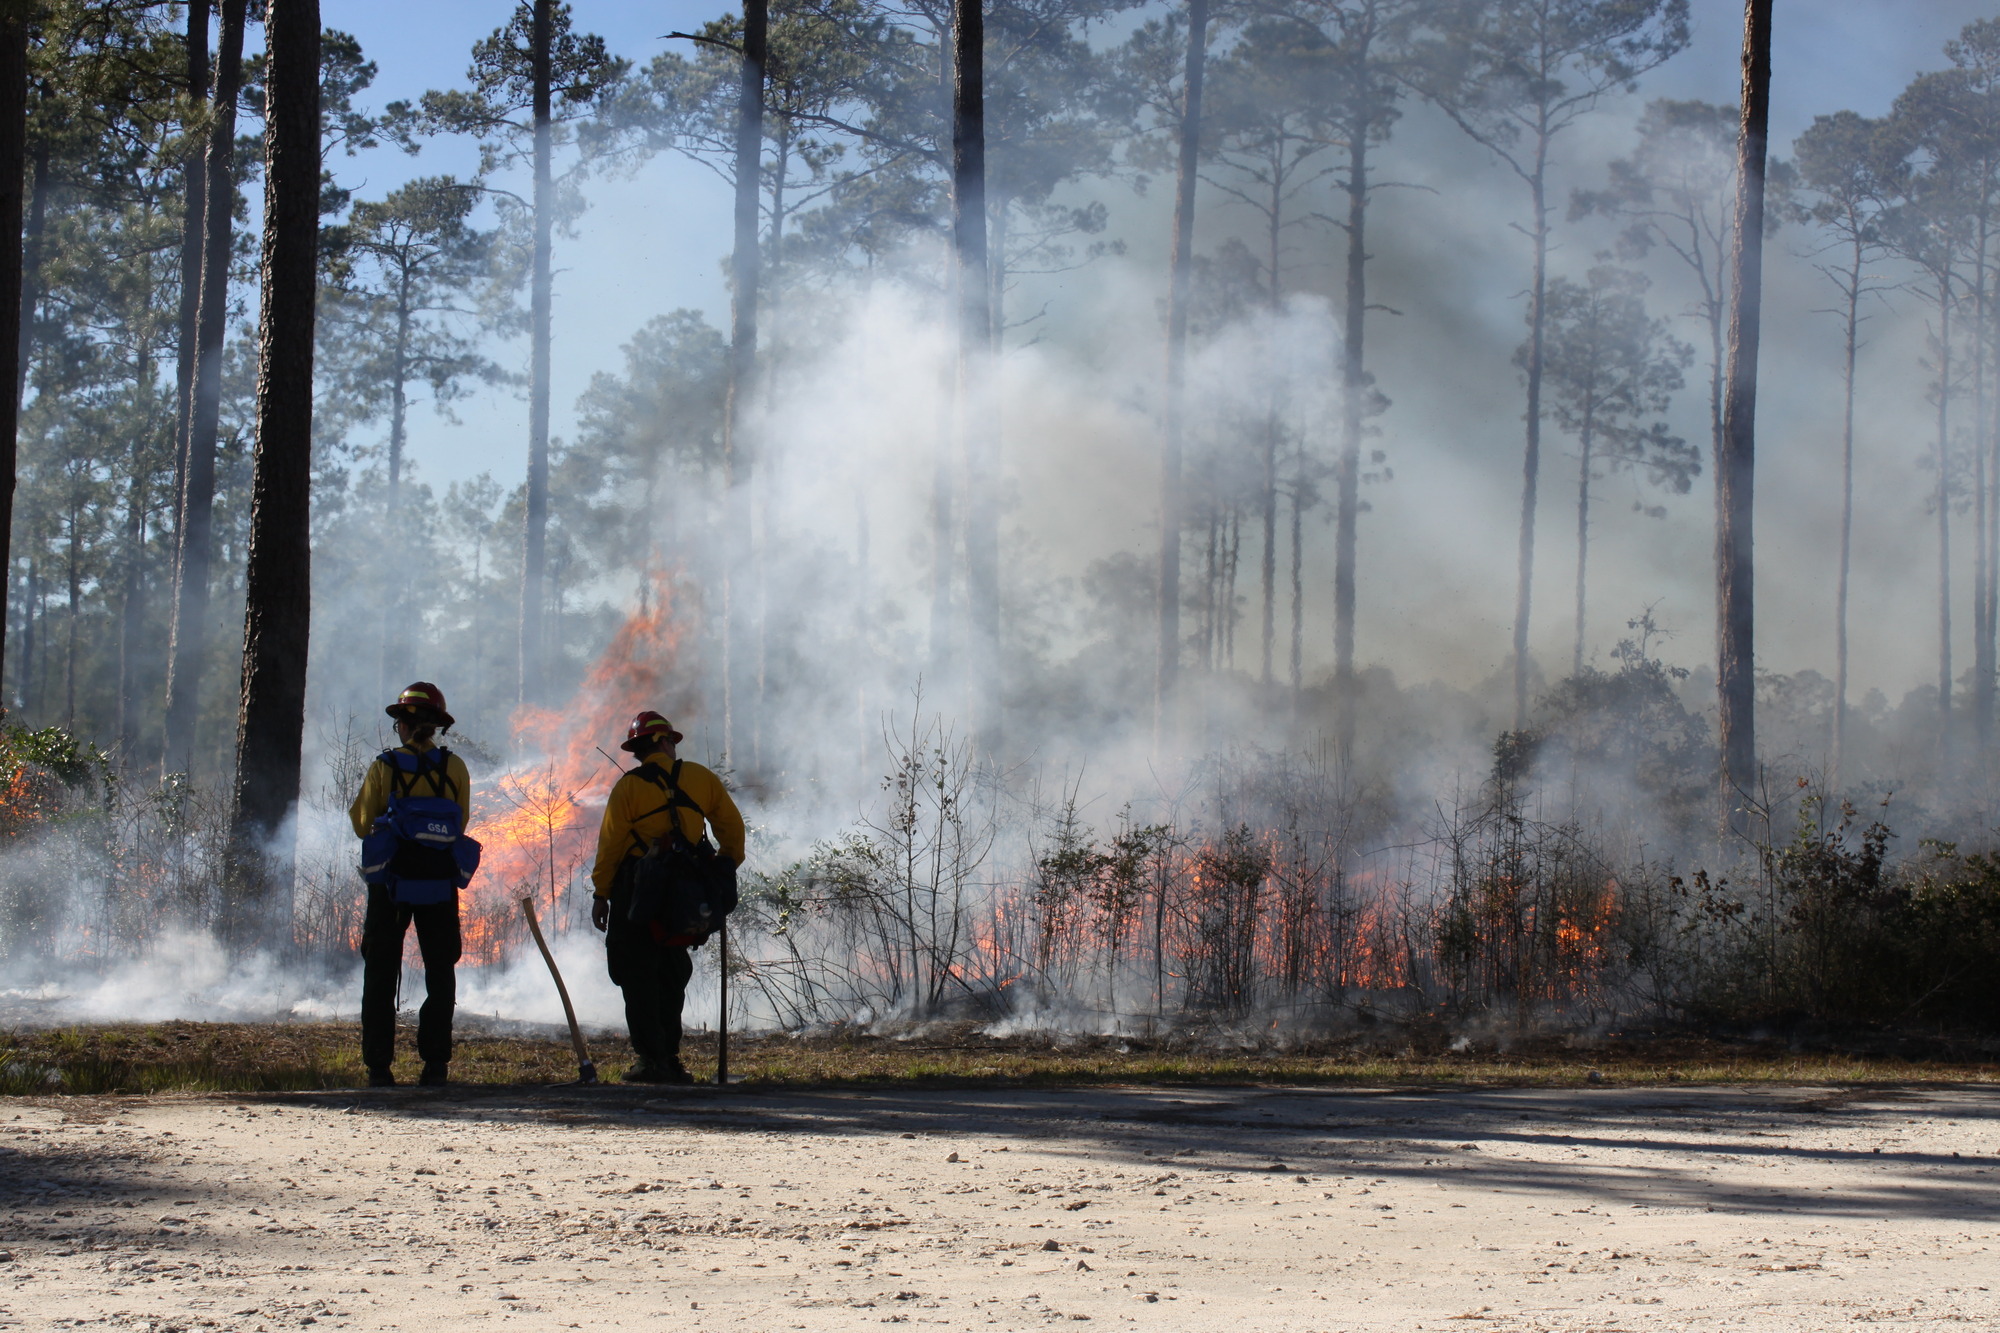 Two firefighters are silhouetted against the flames and smoke of a controlled burn in a pine forest